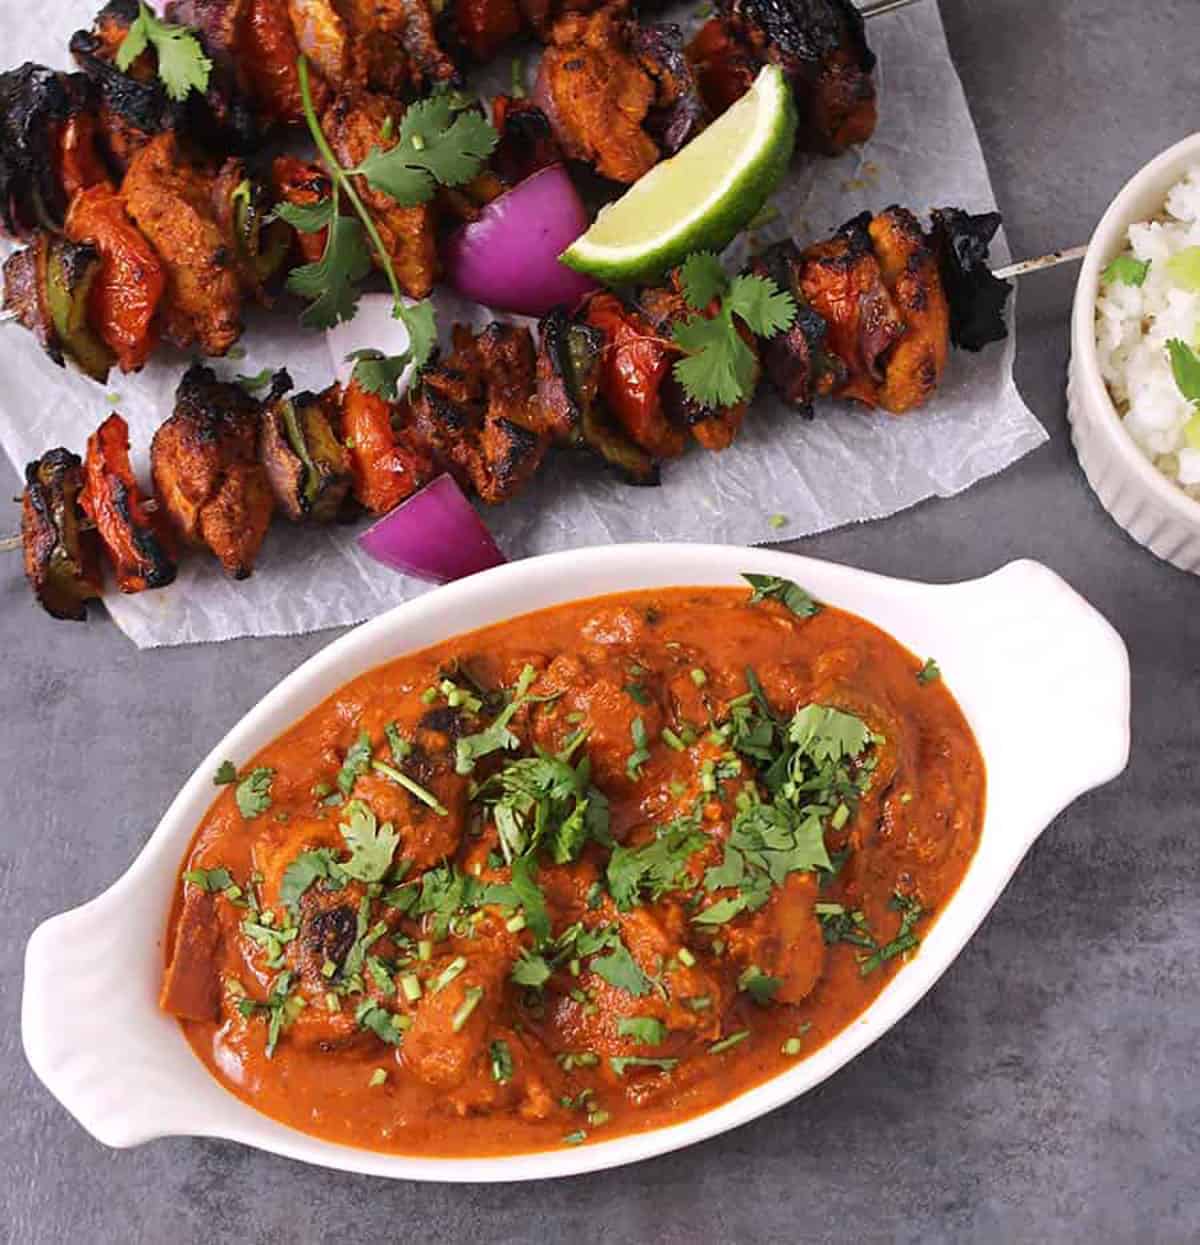 Top view of punjabi chicken tikka masala serve in a white serving bowl. Skewers of chicken tikka in the background.